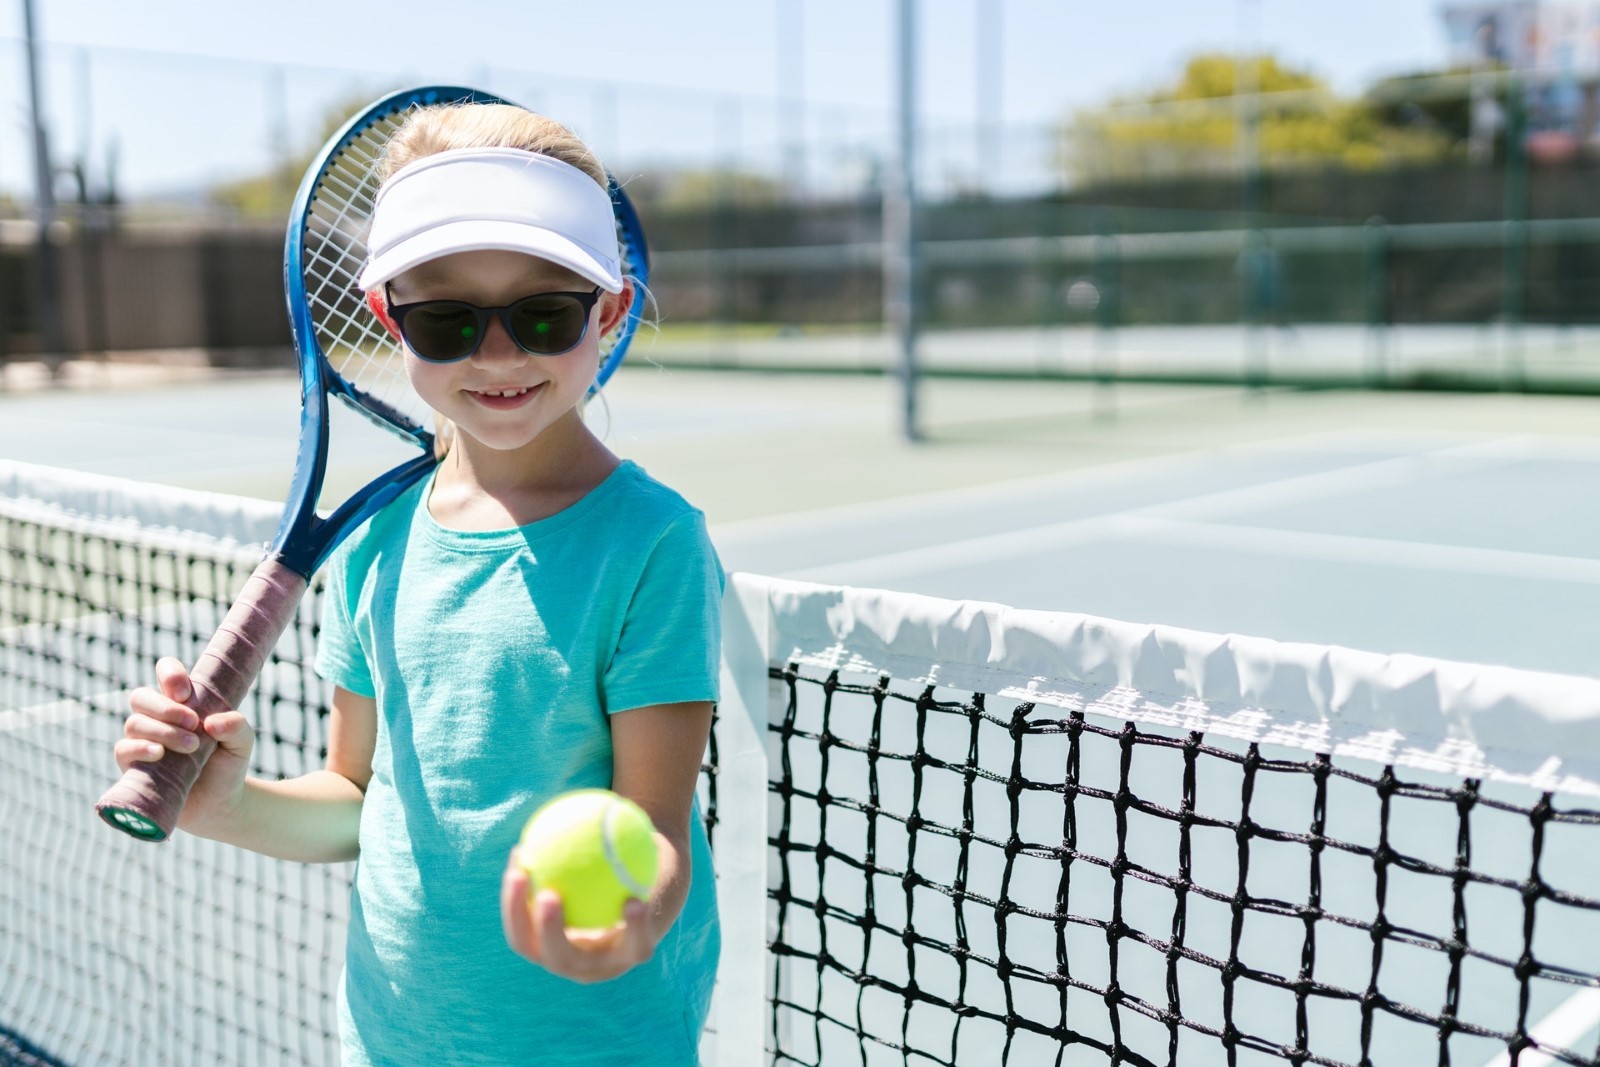 A child holding a tennis racket  Description automatically generated with medium confidence